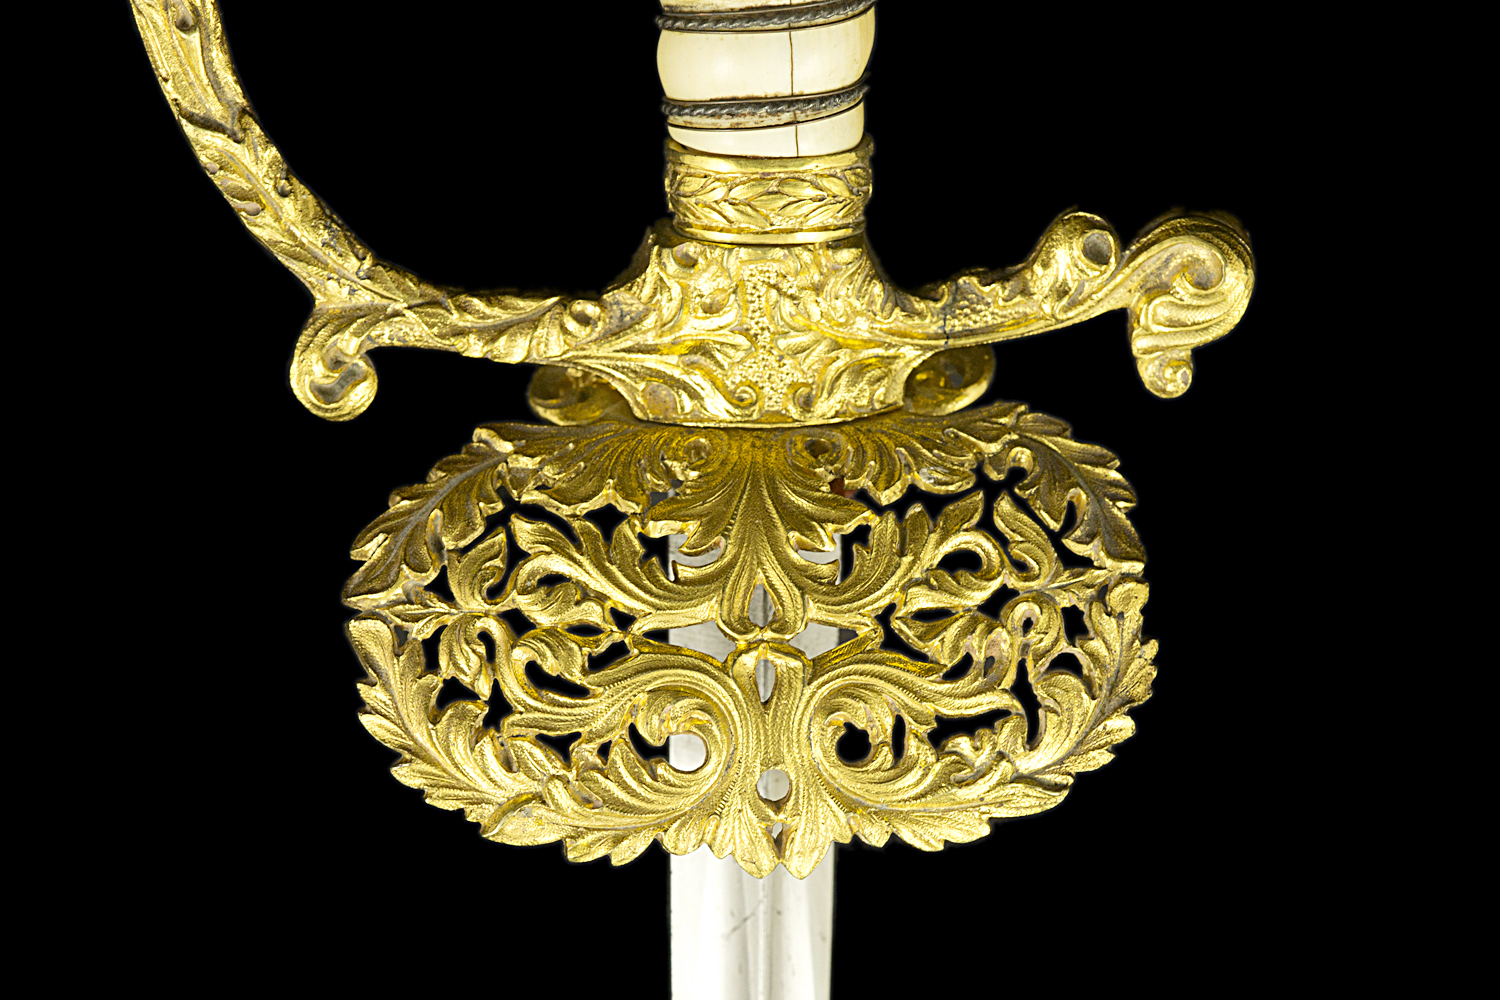 S000215_Ivory_Grip_Smallsword_Detail_Shell_Obverse